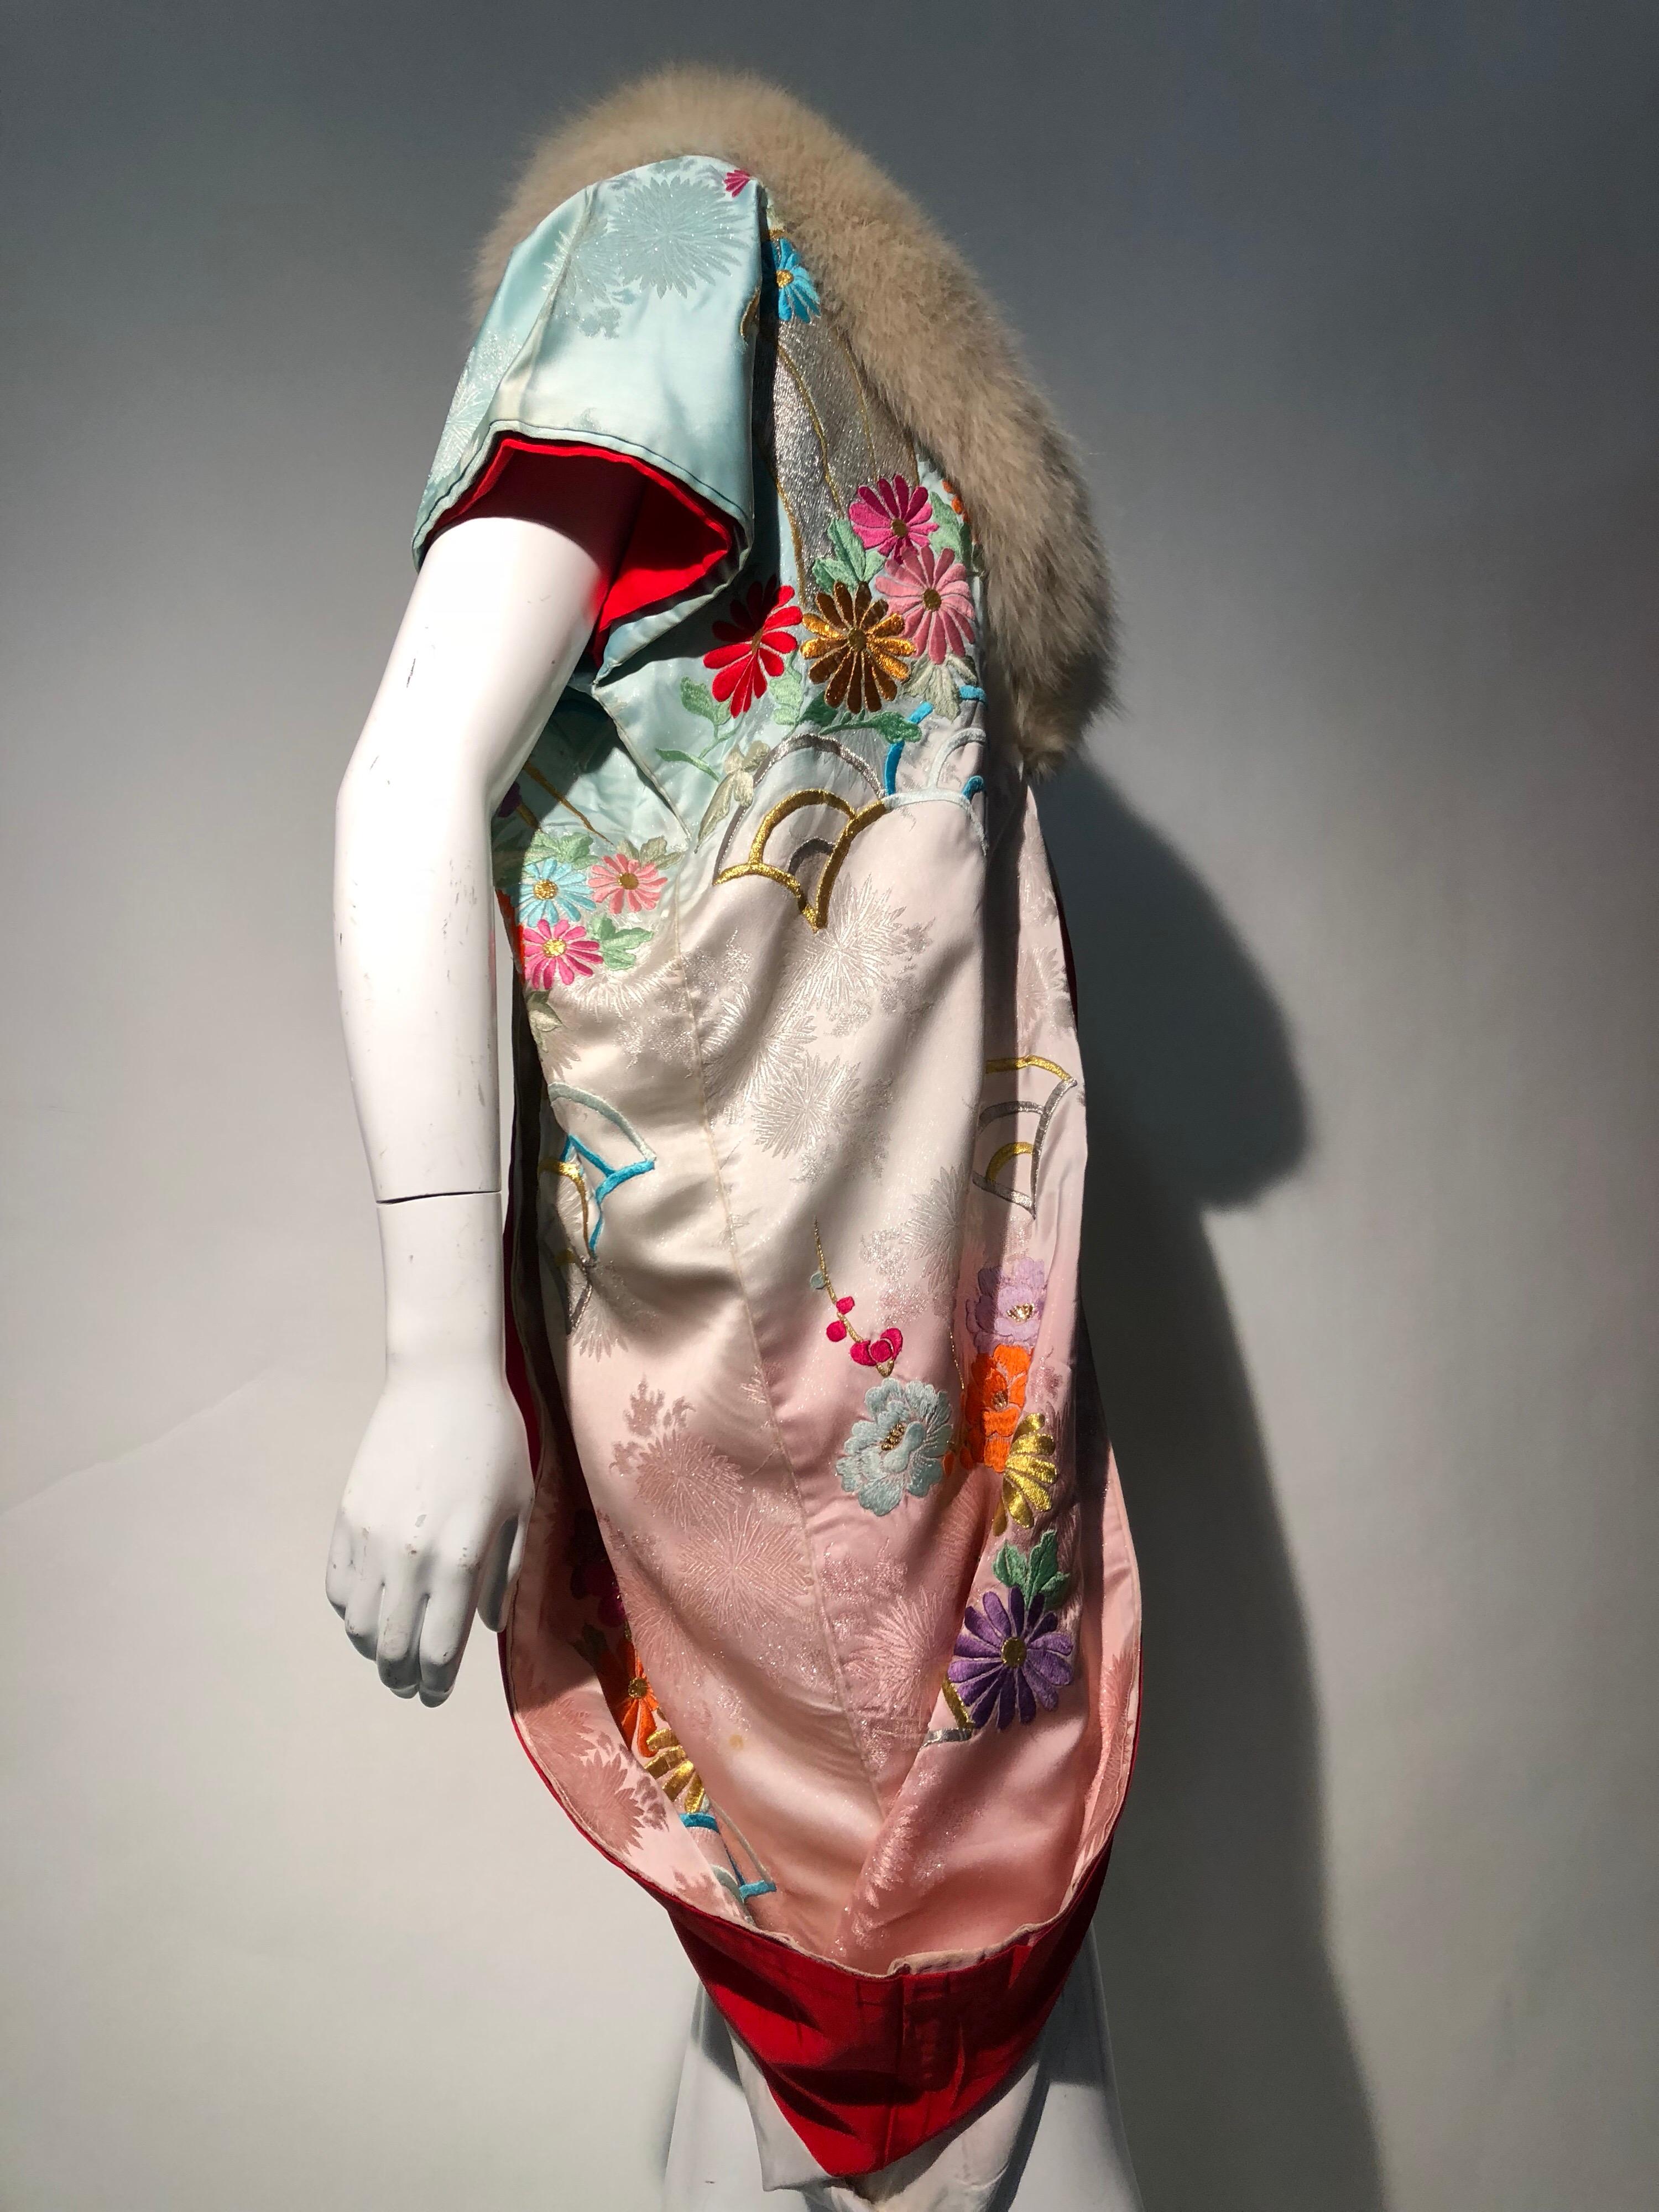 A Torso Creations vintage kimono robe made from 1940s deconstructed extravagant kimono sleeves with a plush vintage fox fur collar. Short-sleeved cut would look superb with long gloves! Red silk lining drapes in a beautiful structured  manner at